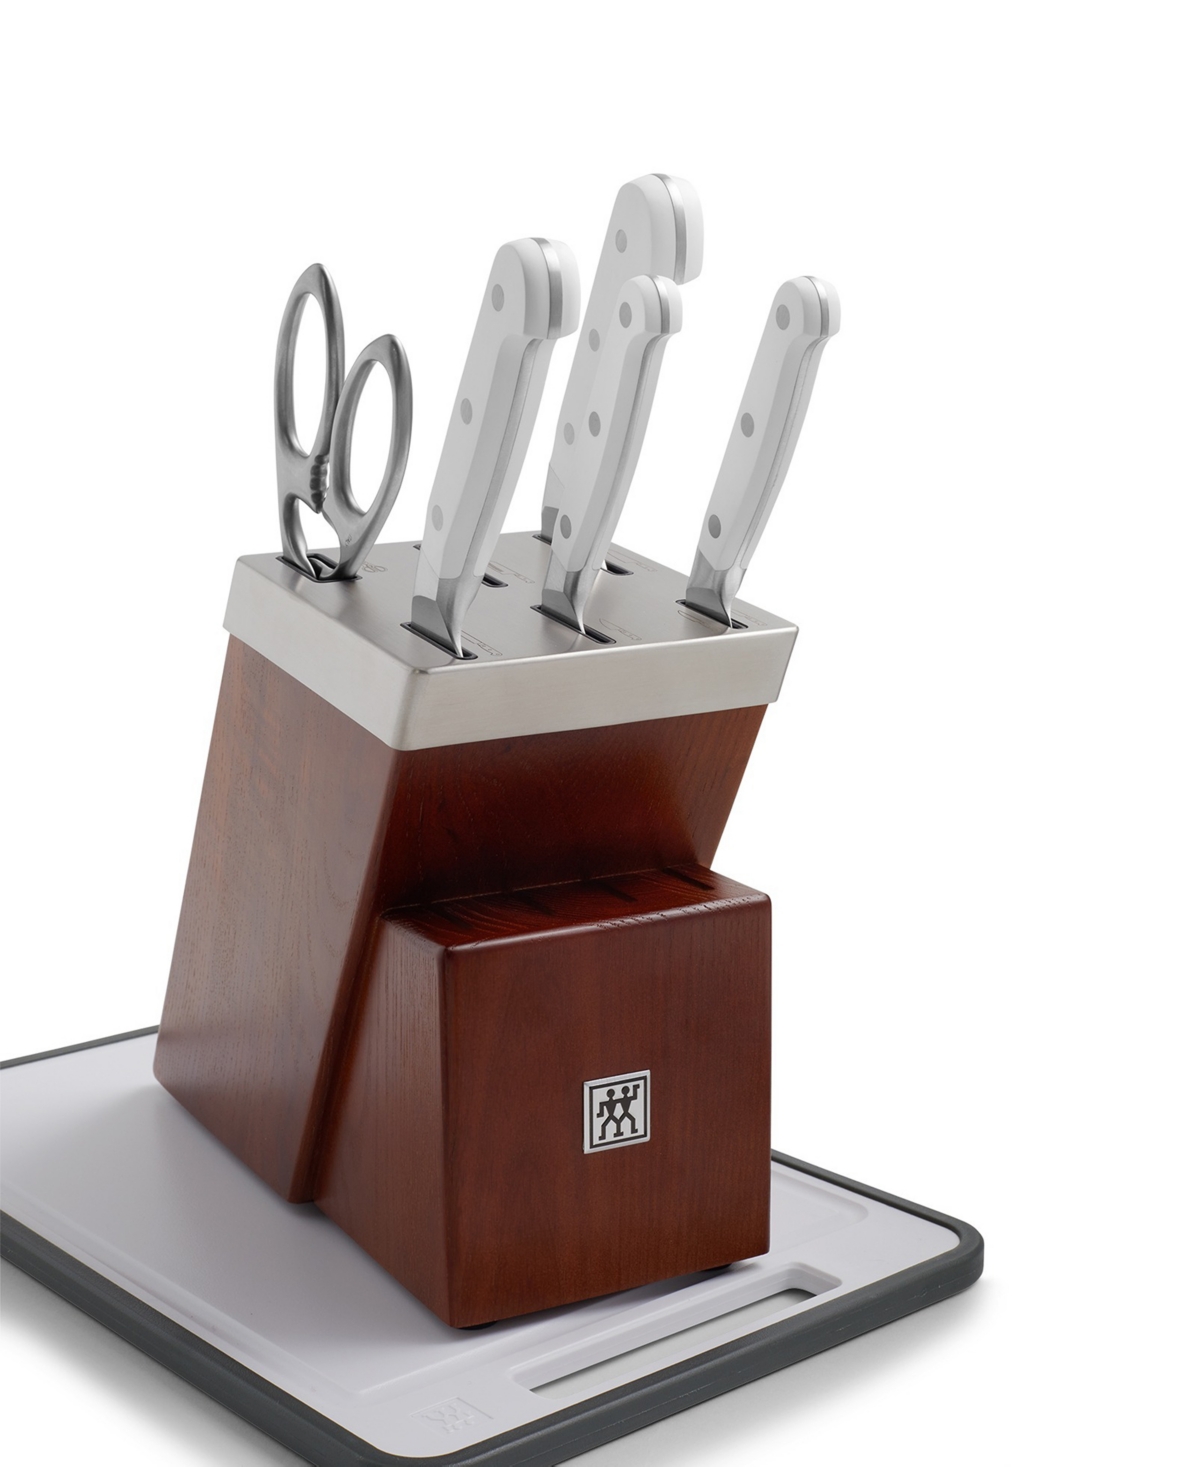 Zwilling Pro Le Blanc 7-piece Self-sharpening Knife Block Set In White